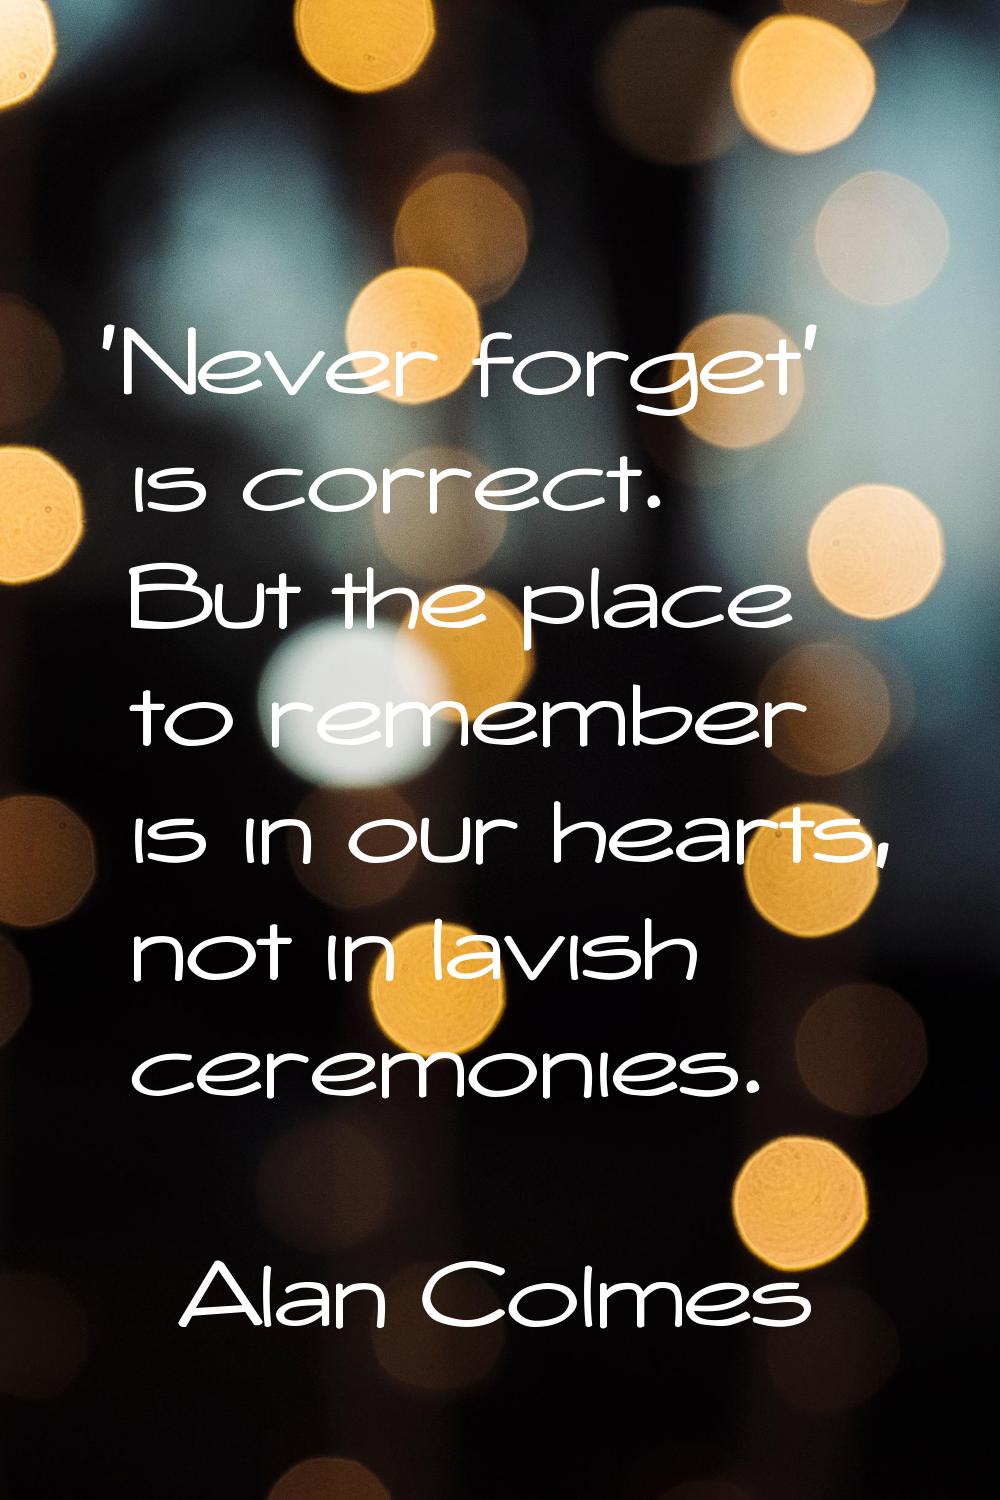 'Never forget' is correct. But the place to remember is in our hearts, not in lavish ceremonies.